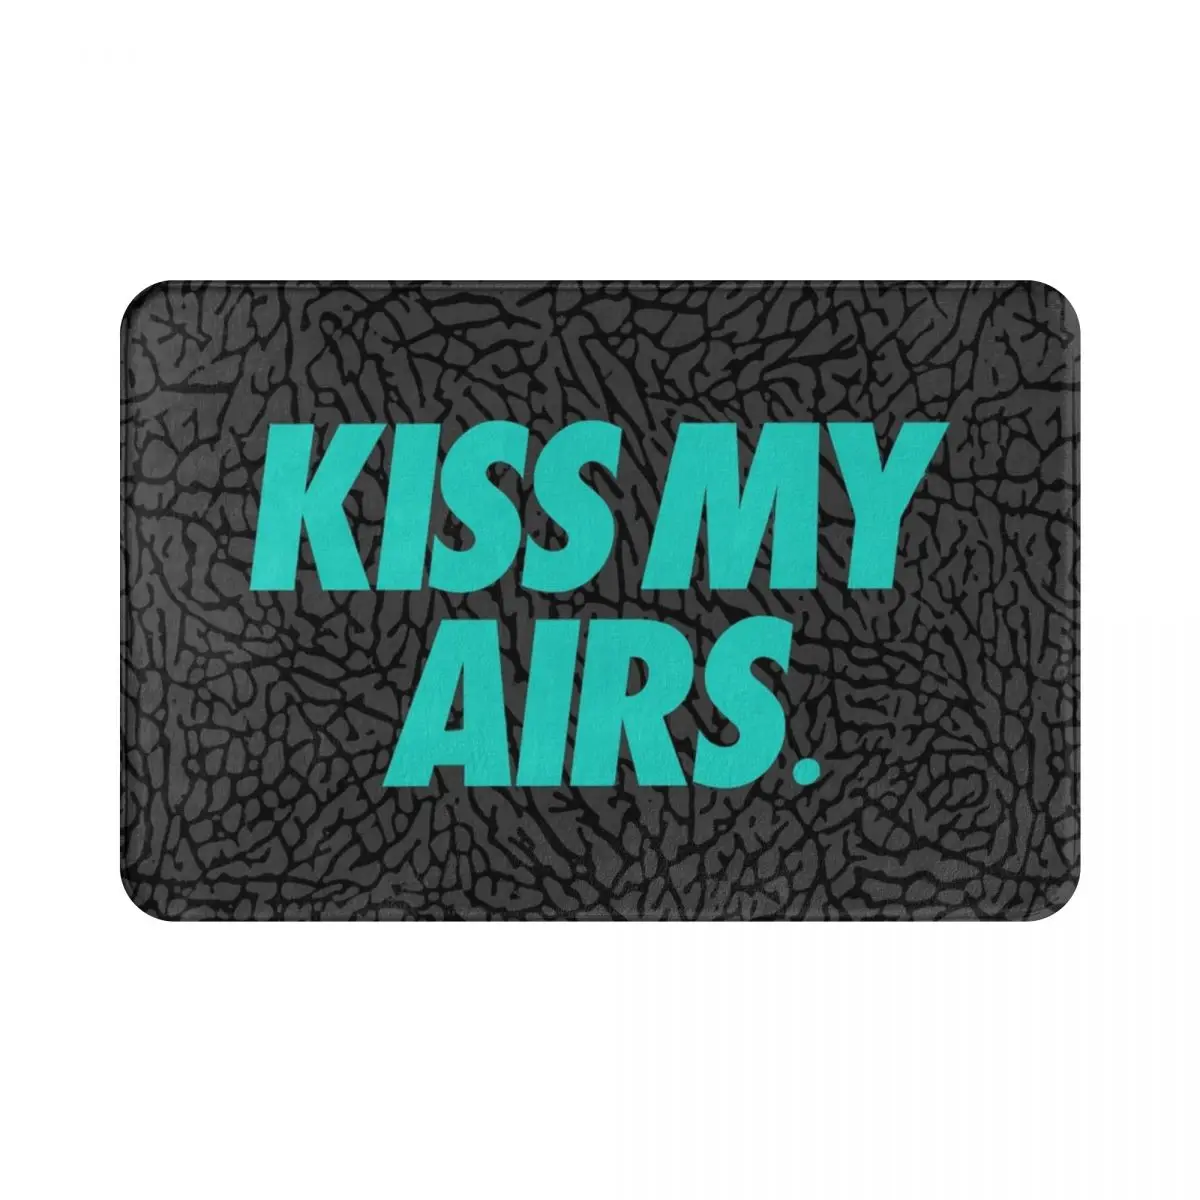 

KISS MY AIRS Polyester Doormat Rug carpet Mat Footpad Non-slip Water oil proof Entrance Kitchen Bedroom balcony toilet 40*60cm